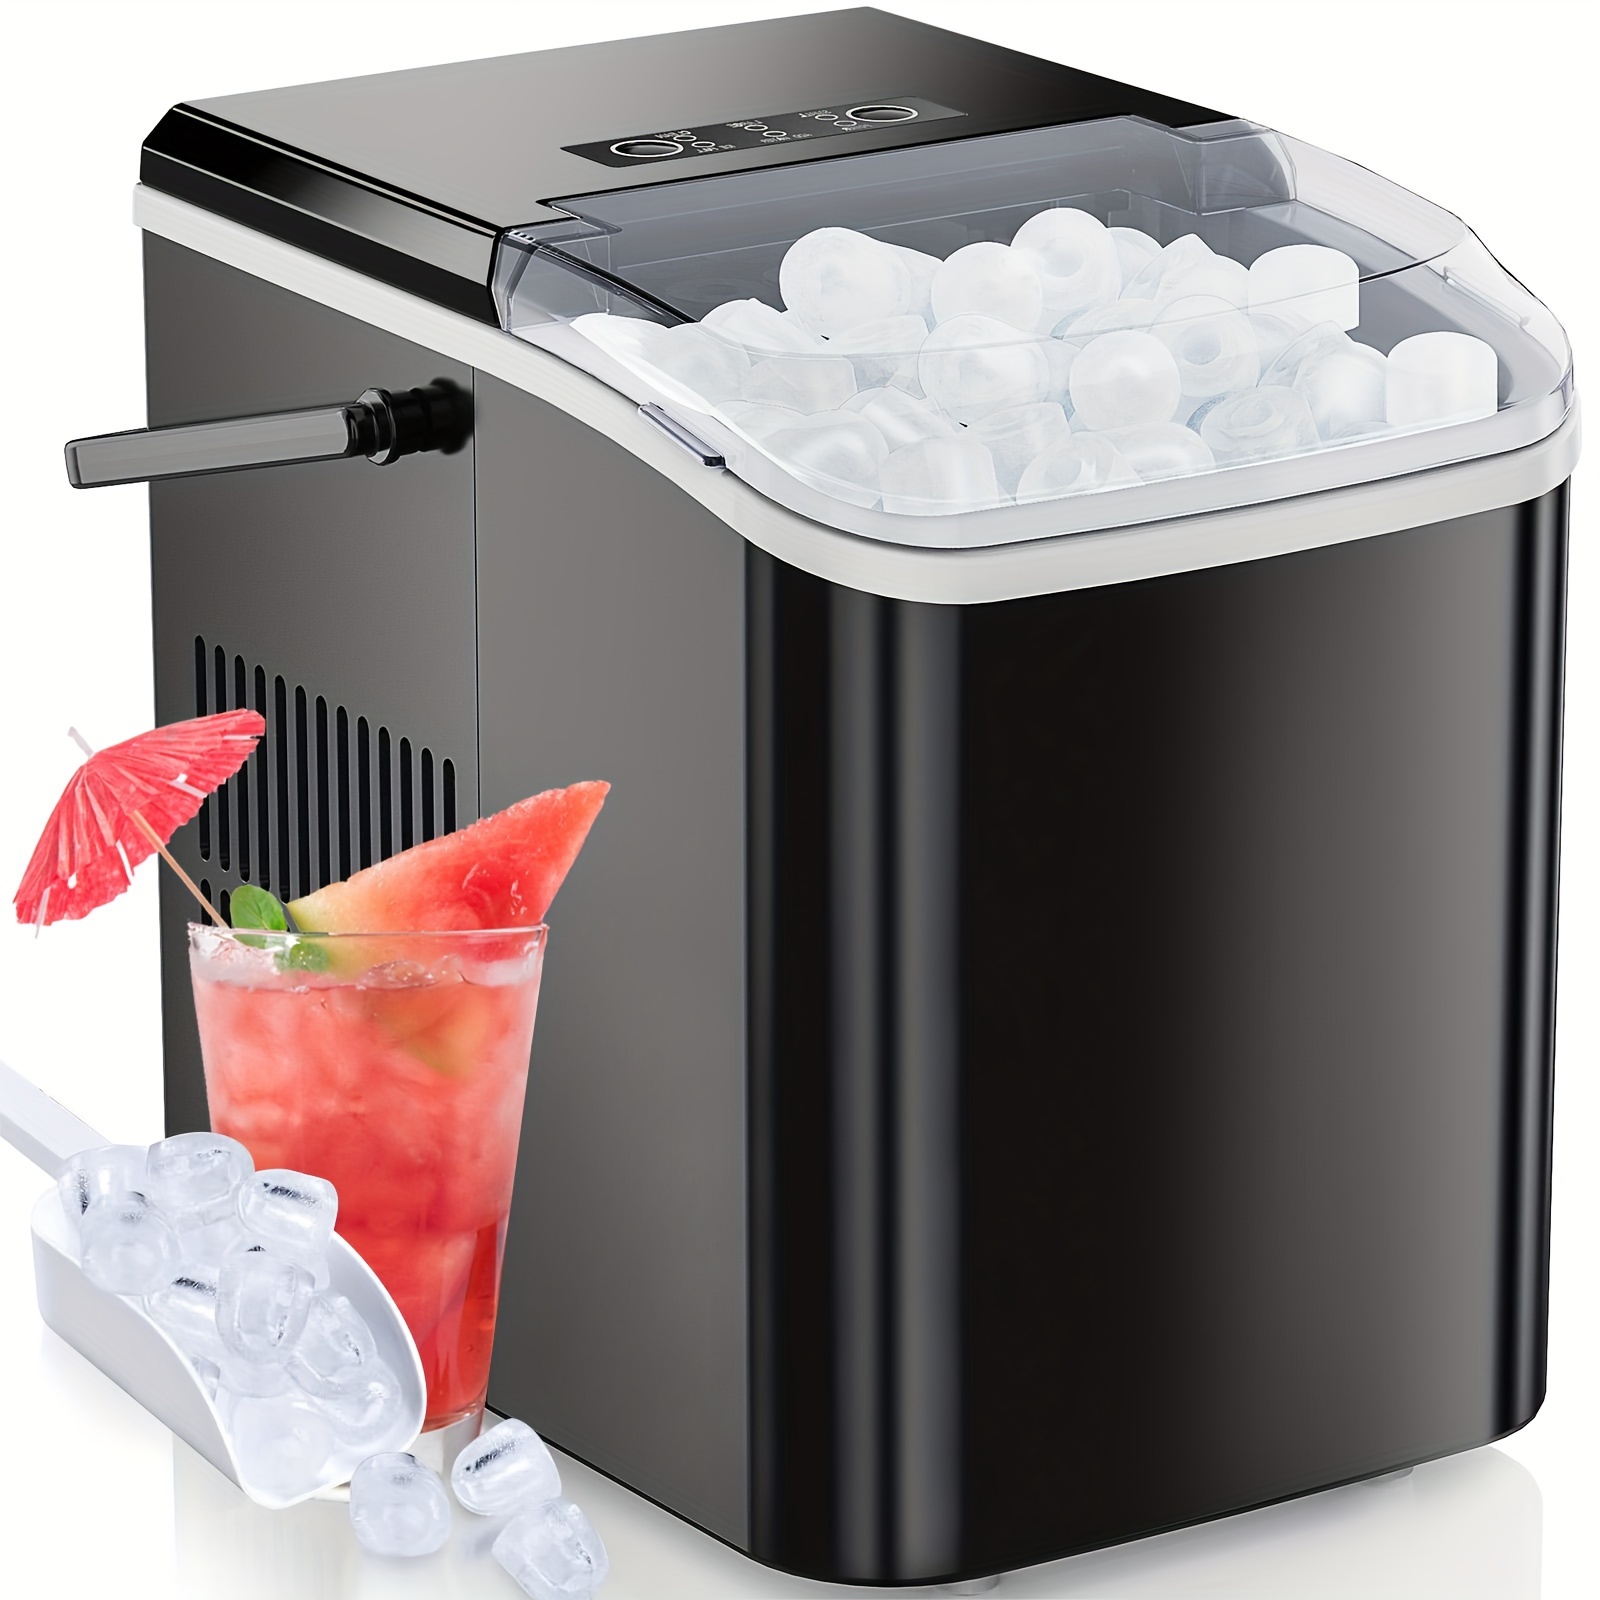 

Ice Maker Countertop - Produces 9 Bullet Ice Cubes In 6 Minutes, 26 Pounds Of Ice In 24 Hours, Small Portable Self-cleaning Ice Maker Suitable For Homes, Kitchens, Rvs, And Parties